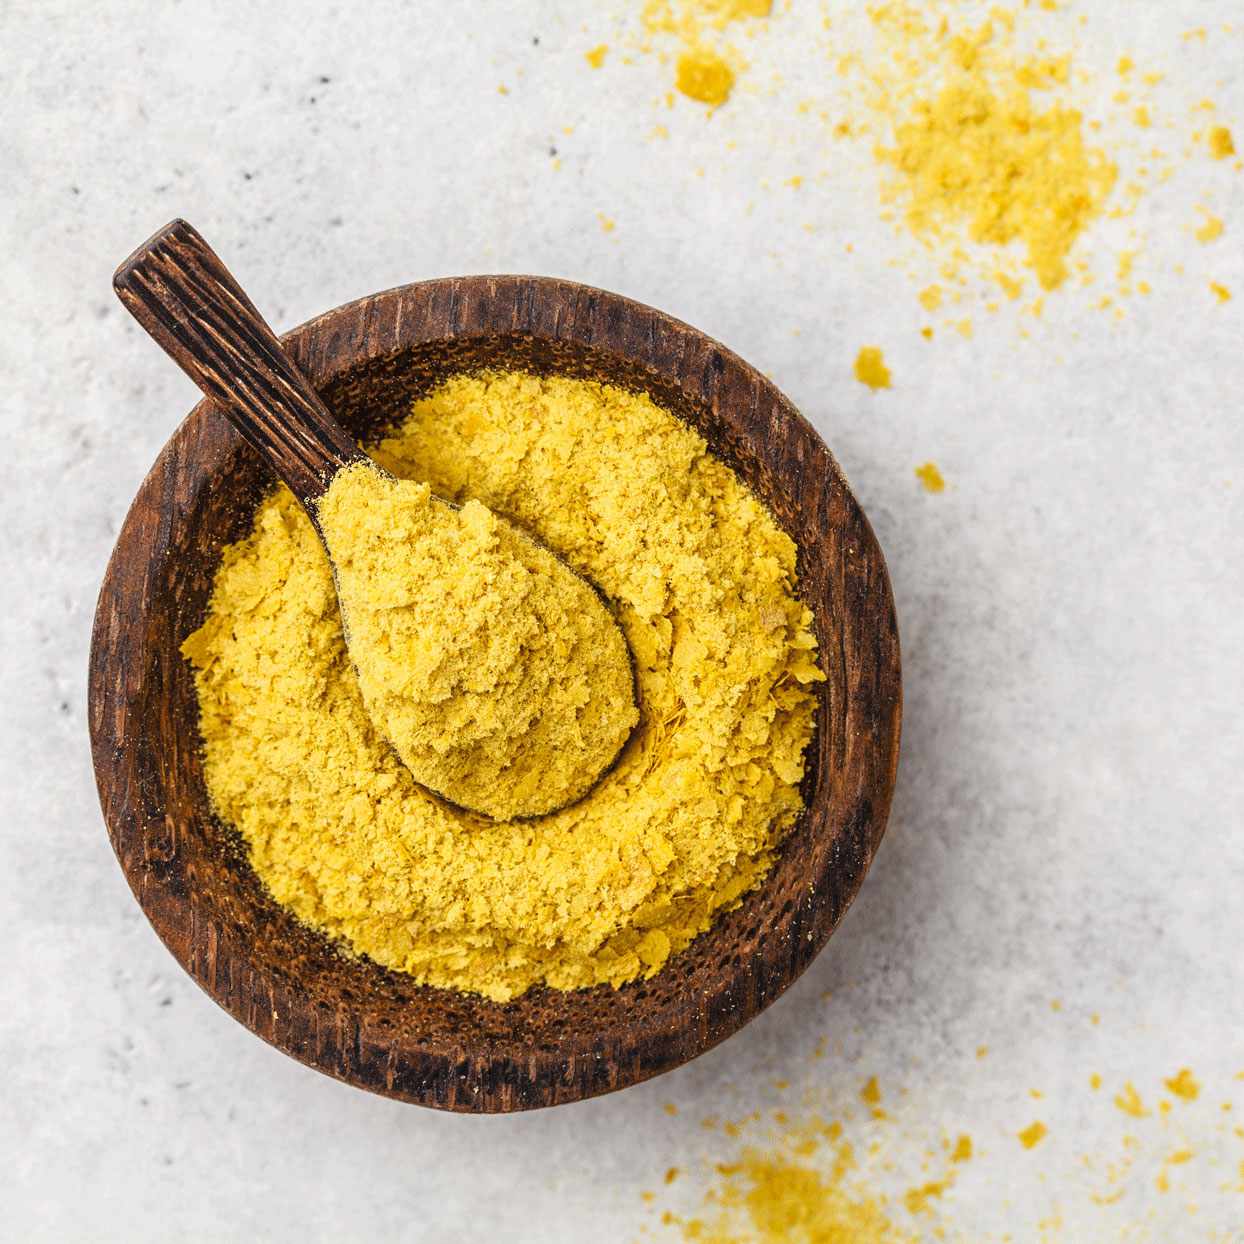 wooden bowl of nutritional yeast